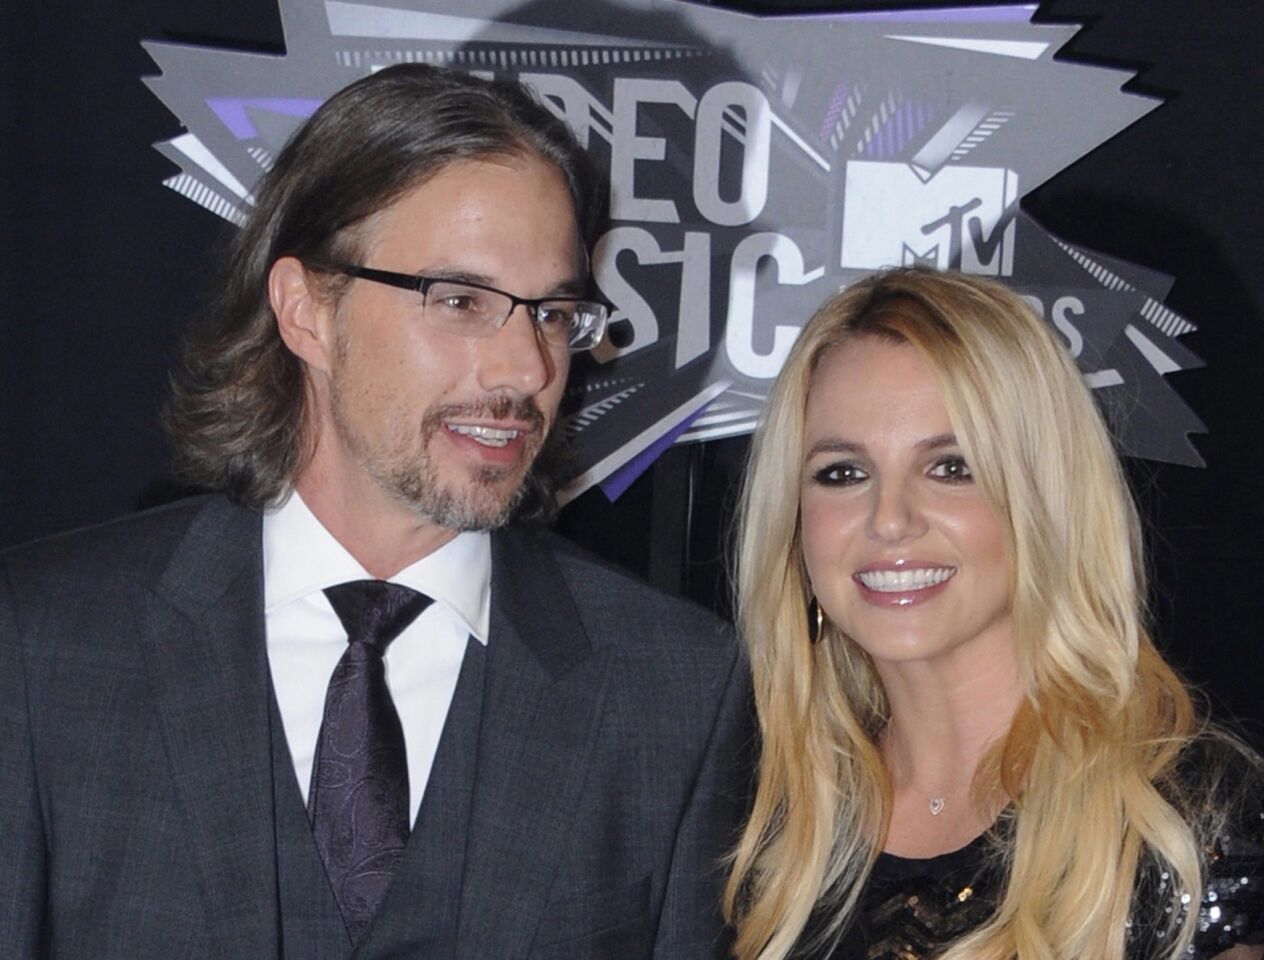 Britney Spears announced on Jan. 11 that she and Jason Trawick were breaking off their engagement after only one year. "I'll always adore him and we will remain great friends," Spears said in a statement released to People. Brit's rep told the mag the decision was mutual. Added Trawick, her onetime agent who'd popped the question back in December 2011: "I love and cherish her and her boys and we will be close forever." Spears has two sons, 7-year-old Preston and 6-year-old Jayden, from her marriage to Kevin Federline. MORE: Britney Spears and Jason Trawick end engagement, go separate ways